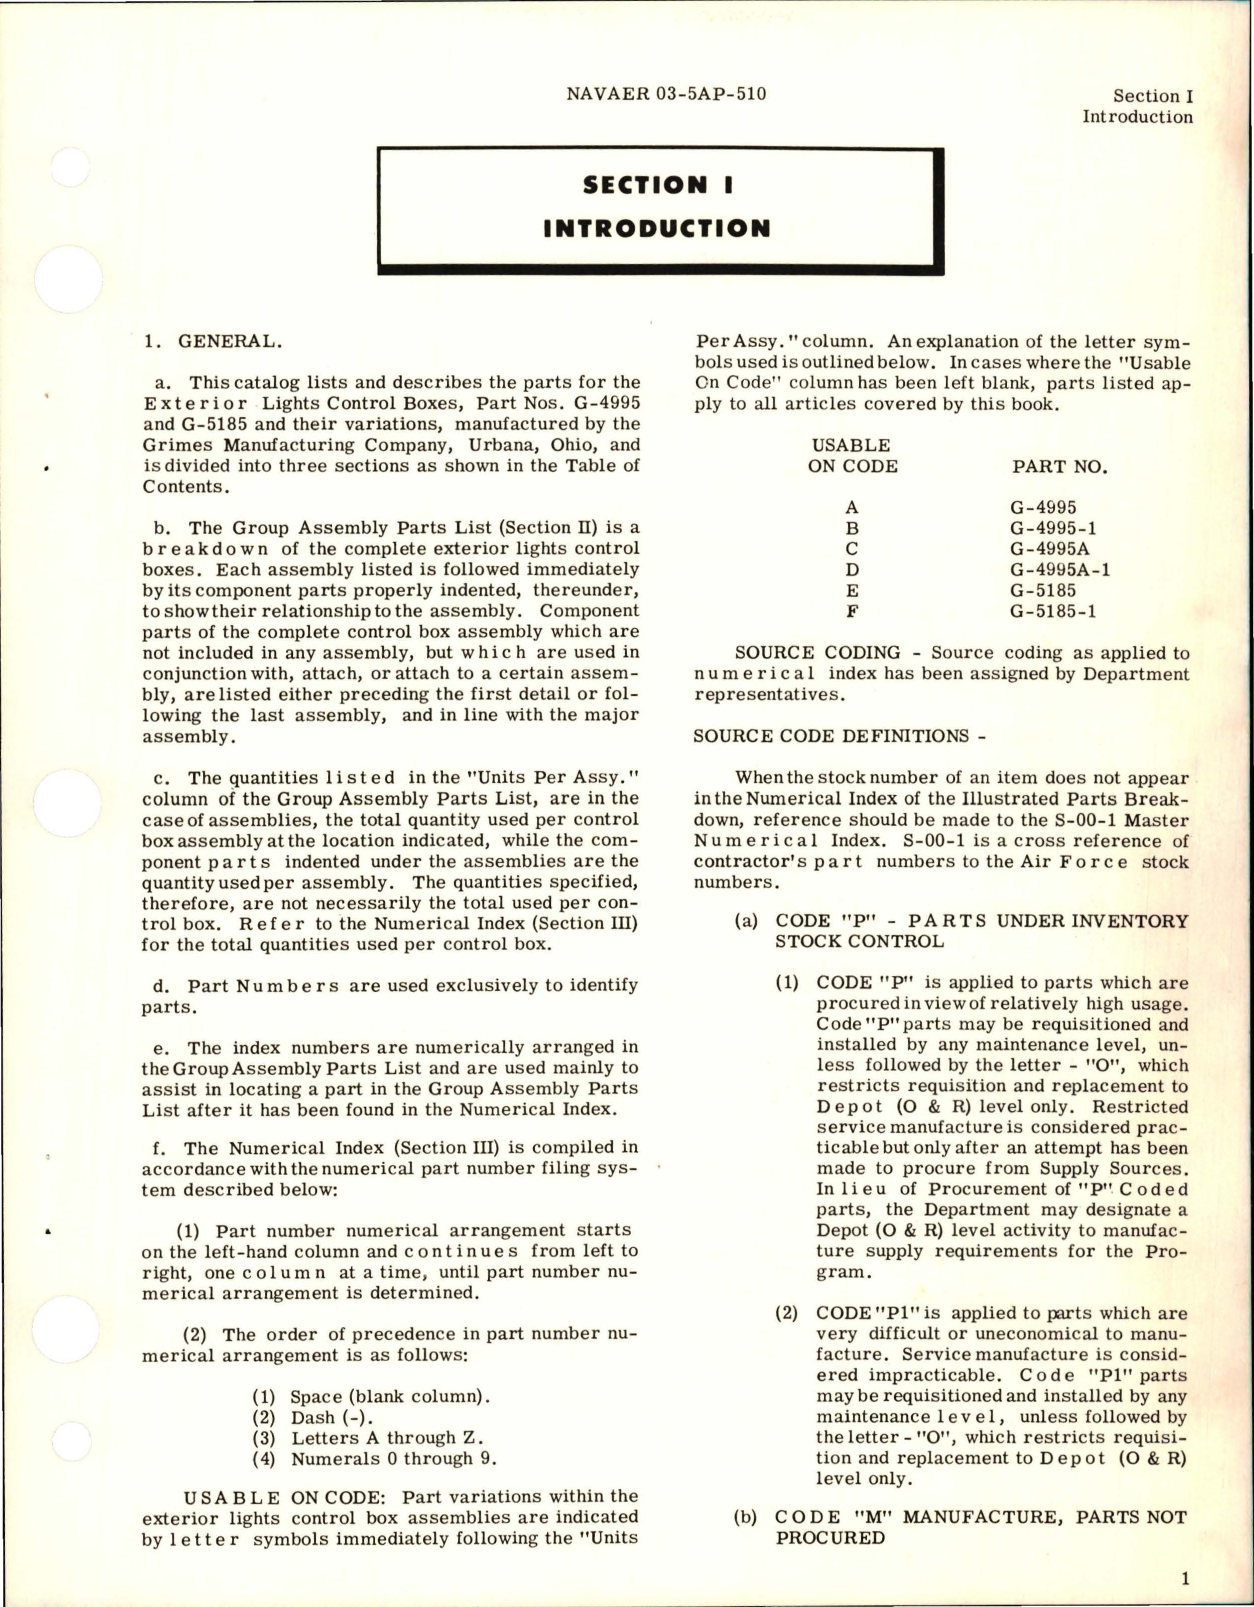 Sample page 5 from AirCorps Library document: Illustrated Parts Breakdown for Exterior Lights Control Box 